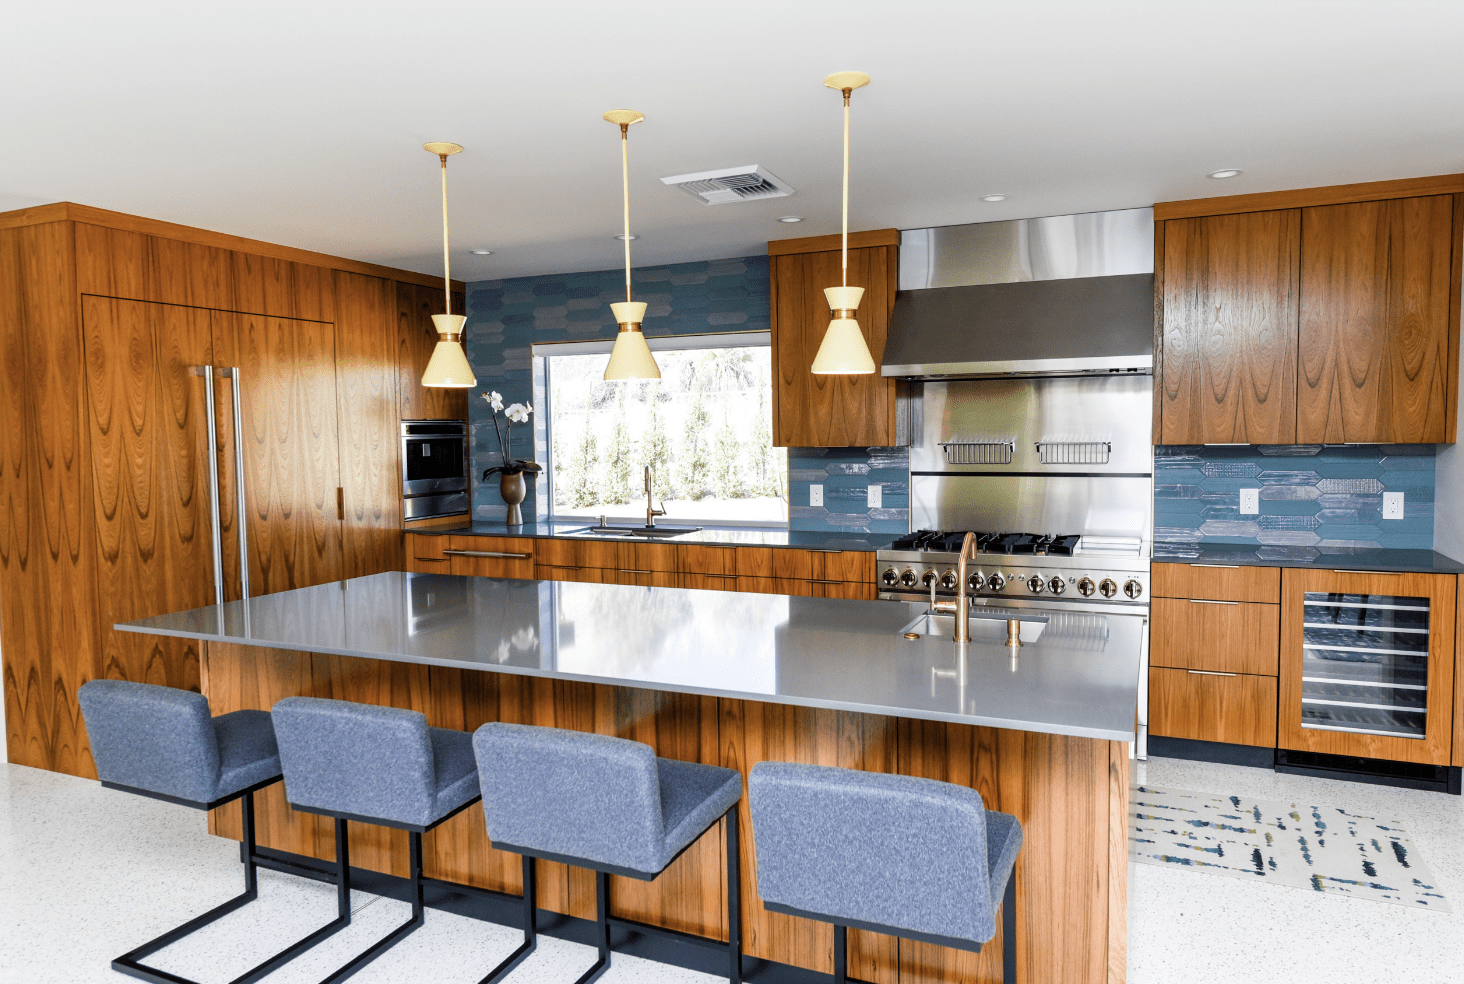 Dark cabinetry mid century modern kitchen with wood finishes, navy blue chairs, and navy blue accents.